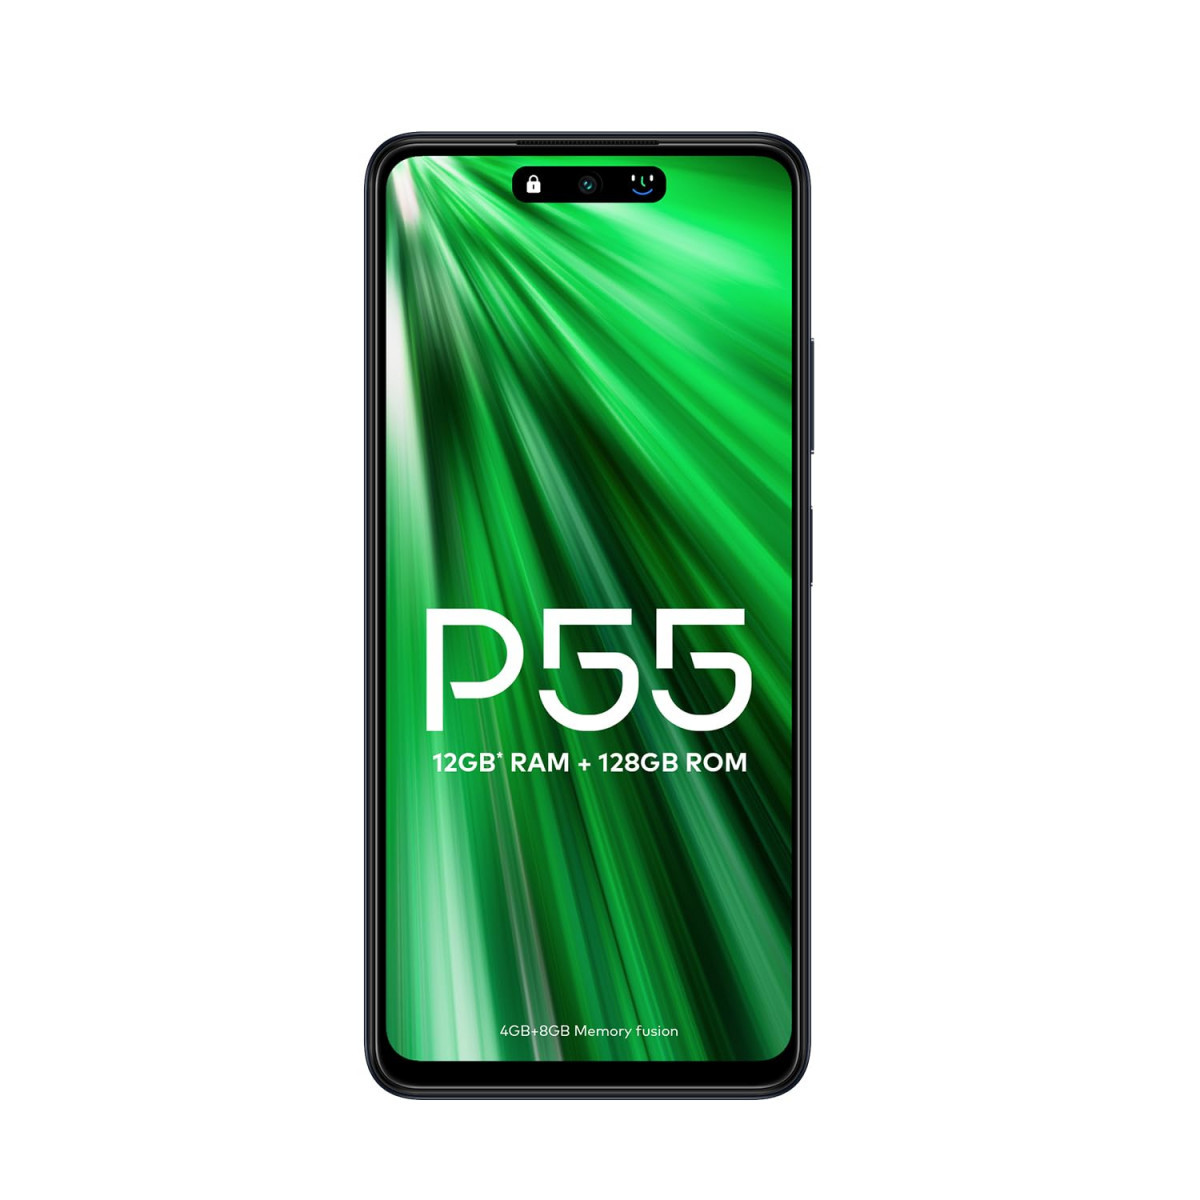 itel P55 4G  Upto 12GB RAM with Memory Fusion  128GB ROM 50MP AI Dual Rear Camera  8MP Front Camera 5000mAh Battery with 18W Charger  Dynamic BarUFS 22 Moonlit Black